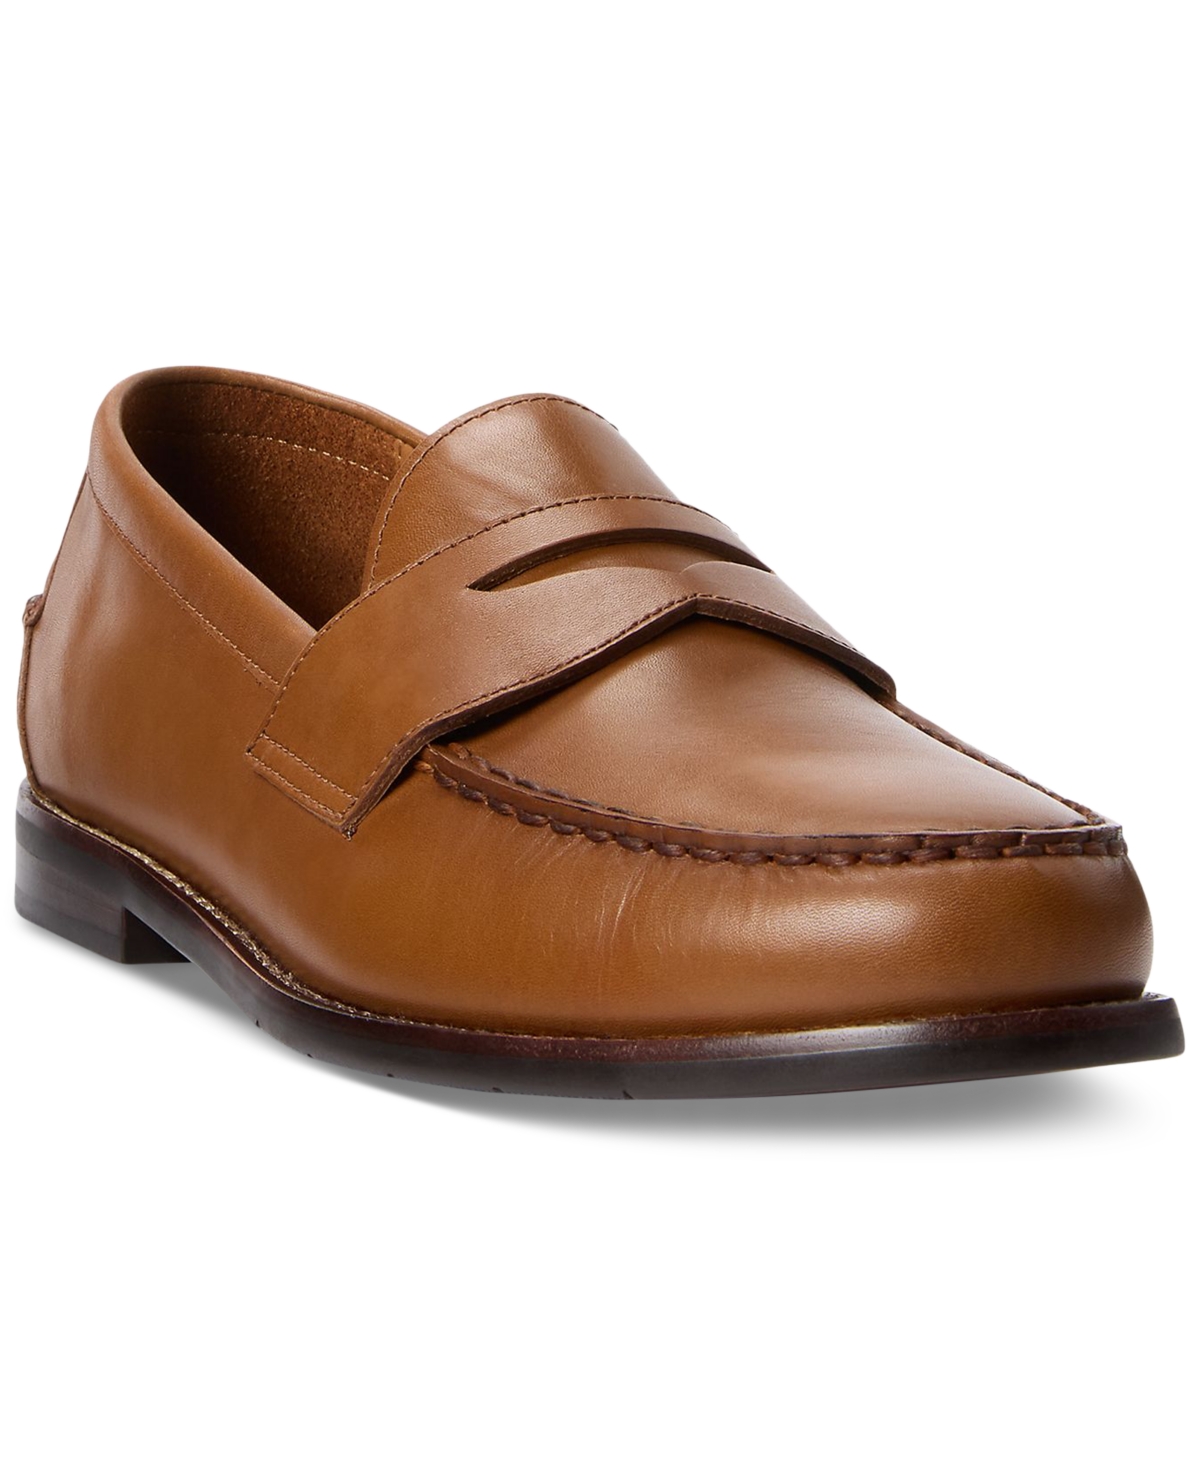 Polo Ralph Lauren Alston Leather Penny Loafers Tan